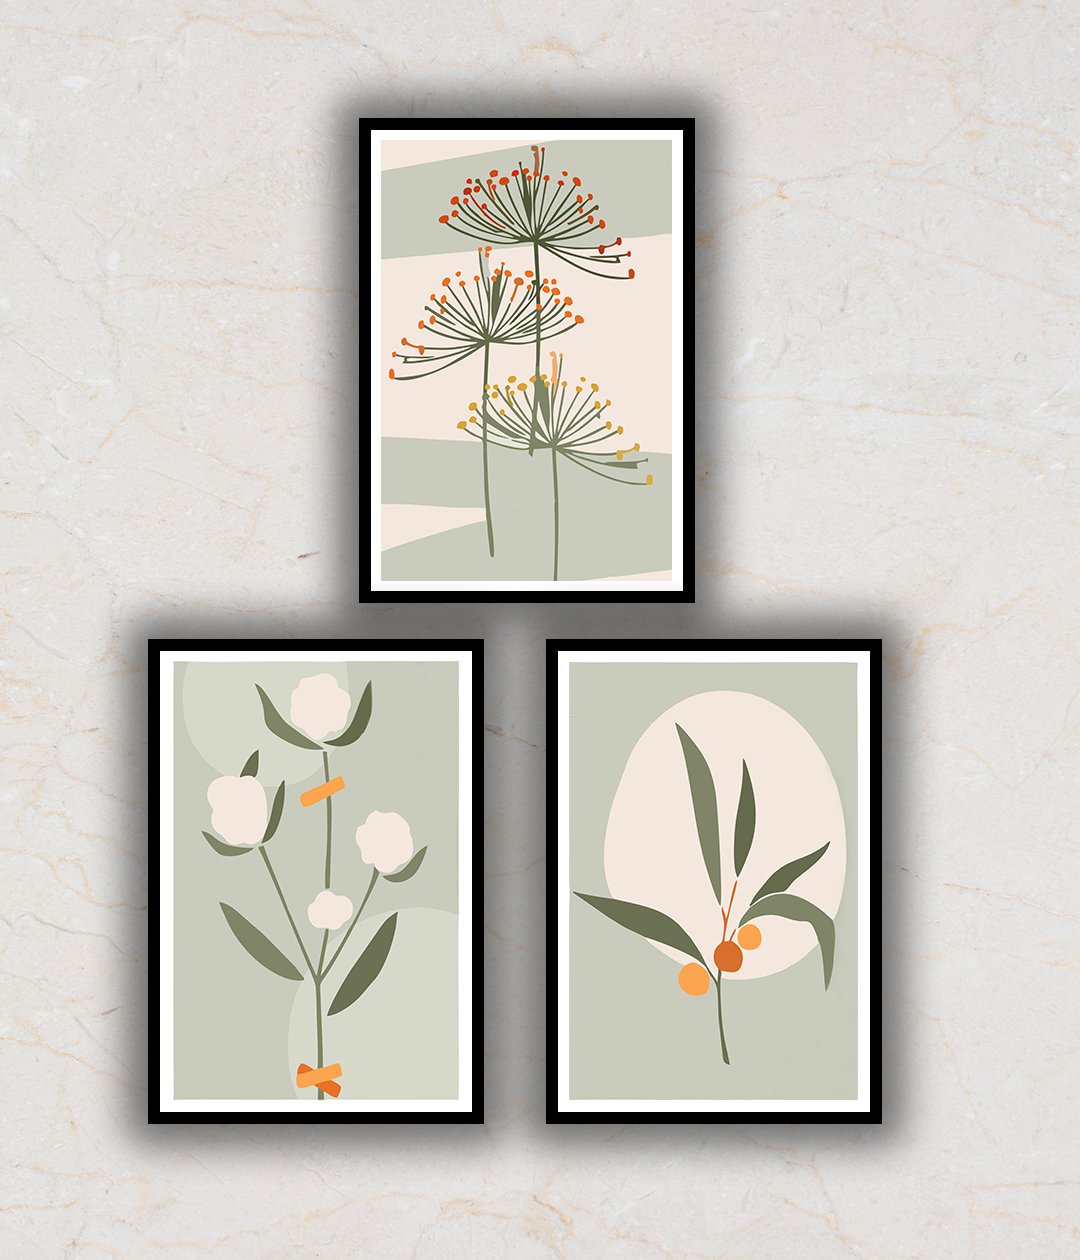 Set of 3 Pastel Reflections Abstract Floral Art